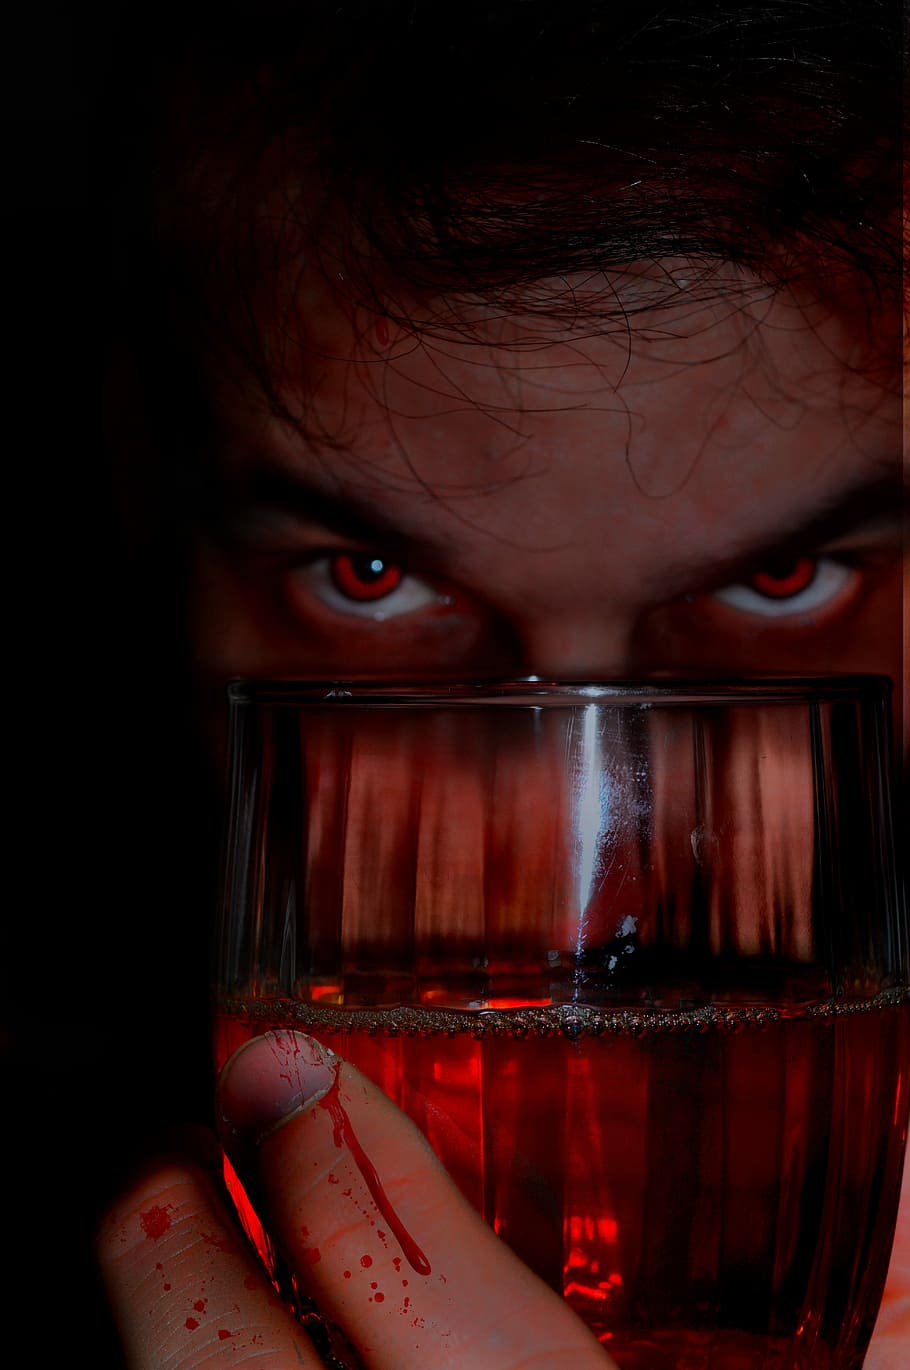 man, holding, clear, glass wine glass, Horror, Fear, Terror, Chilling, halloween, scary